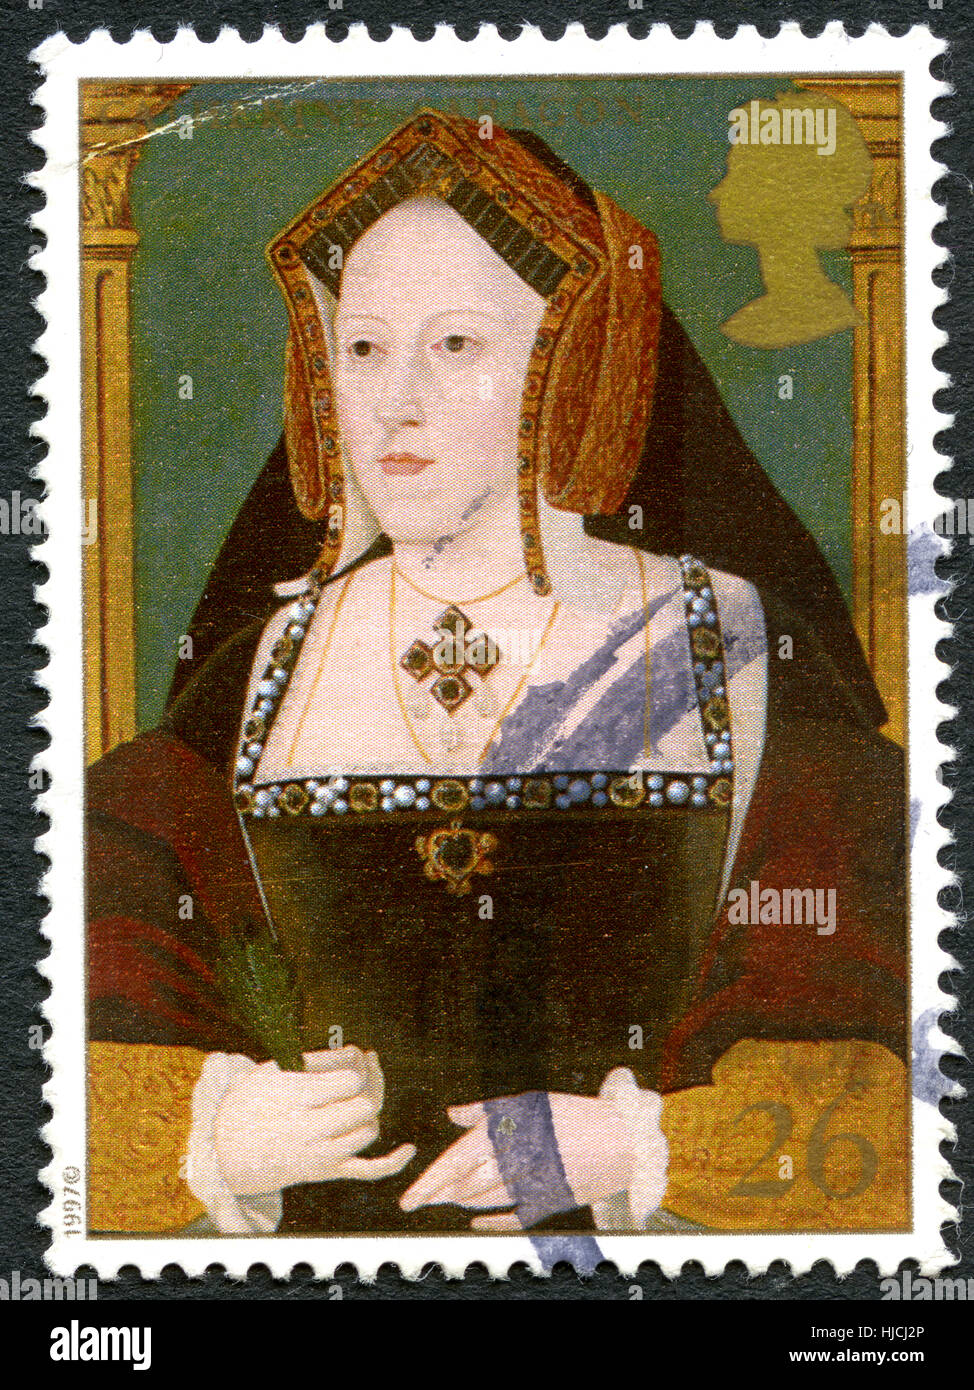 UNITED KINGDOM - CIRCA 1997: A used postage stamp from the UK, depicting an illustration of Catherine of Aragon, the first wife of King Henry VIII, ci Stock Photo